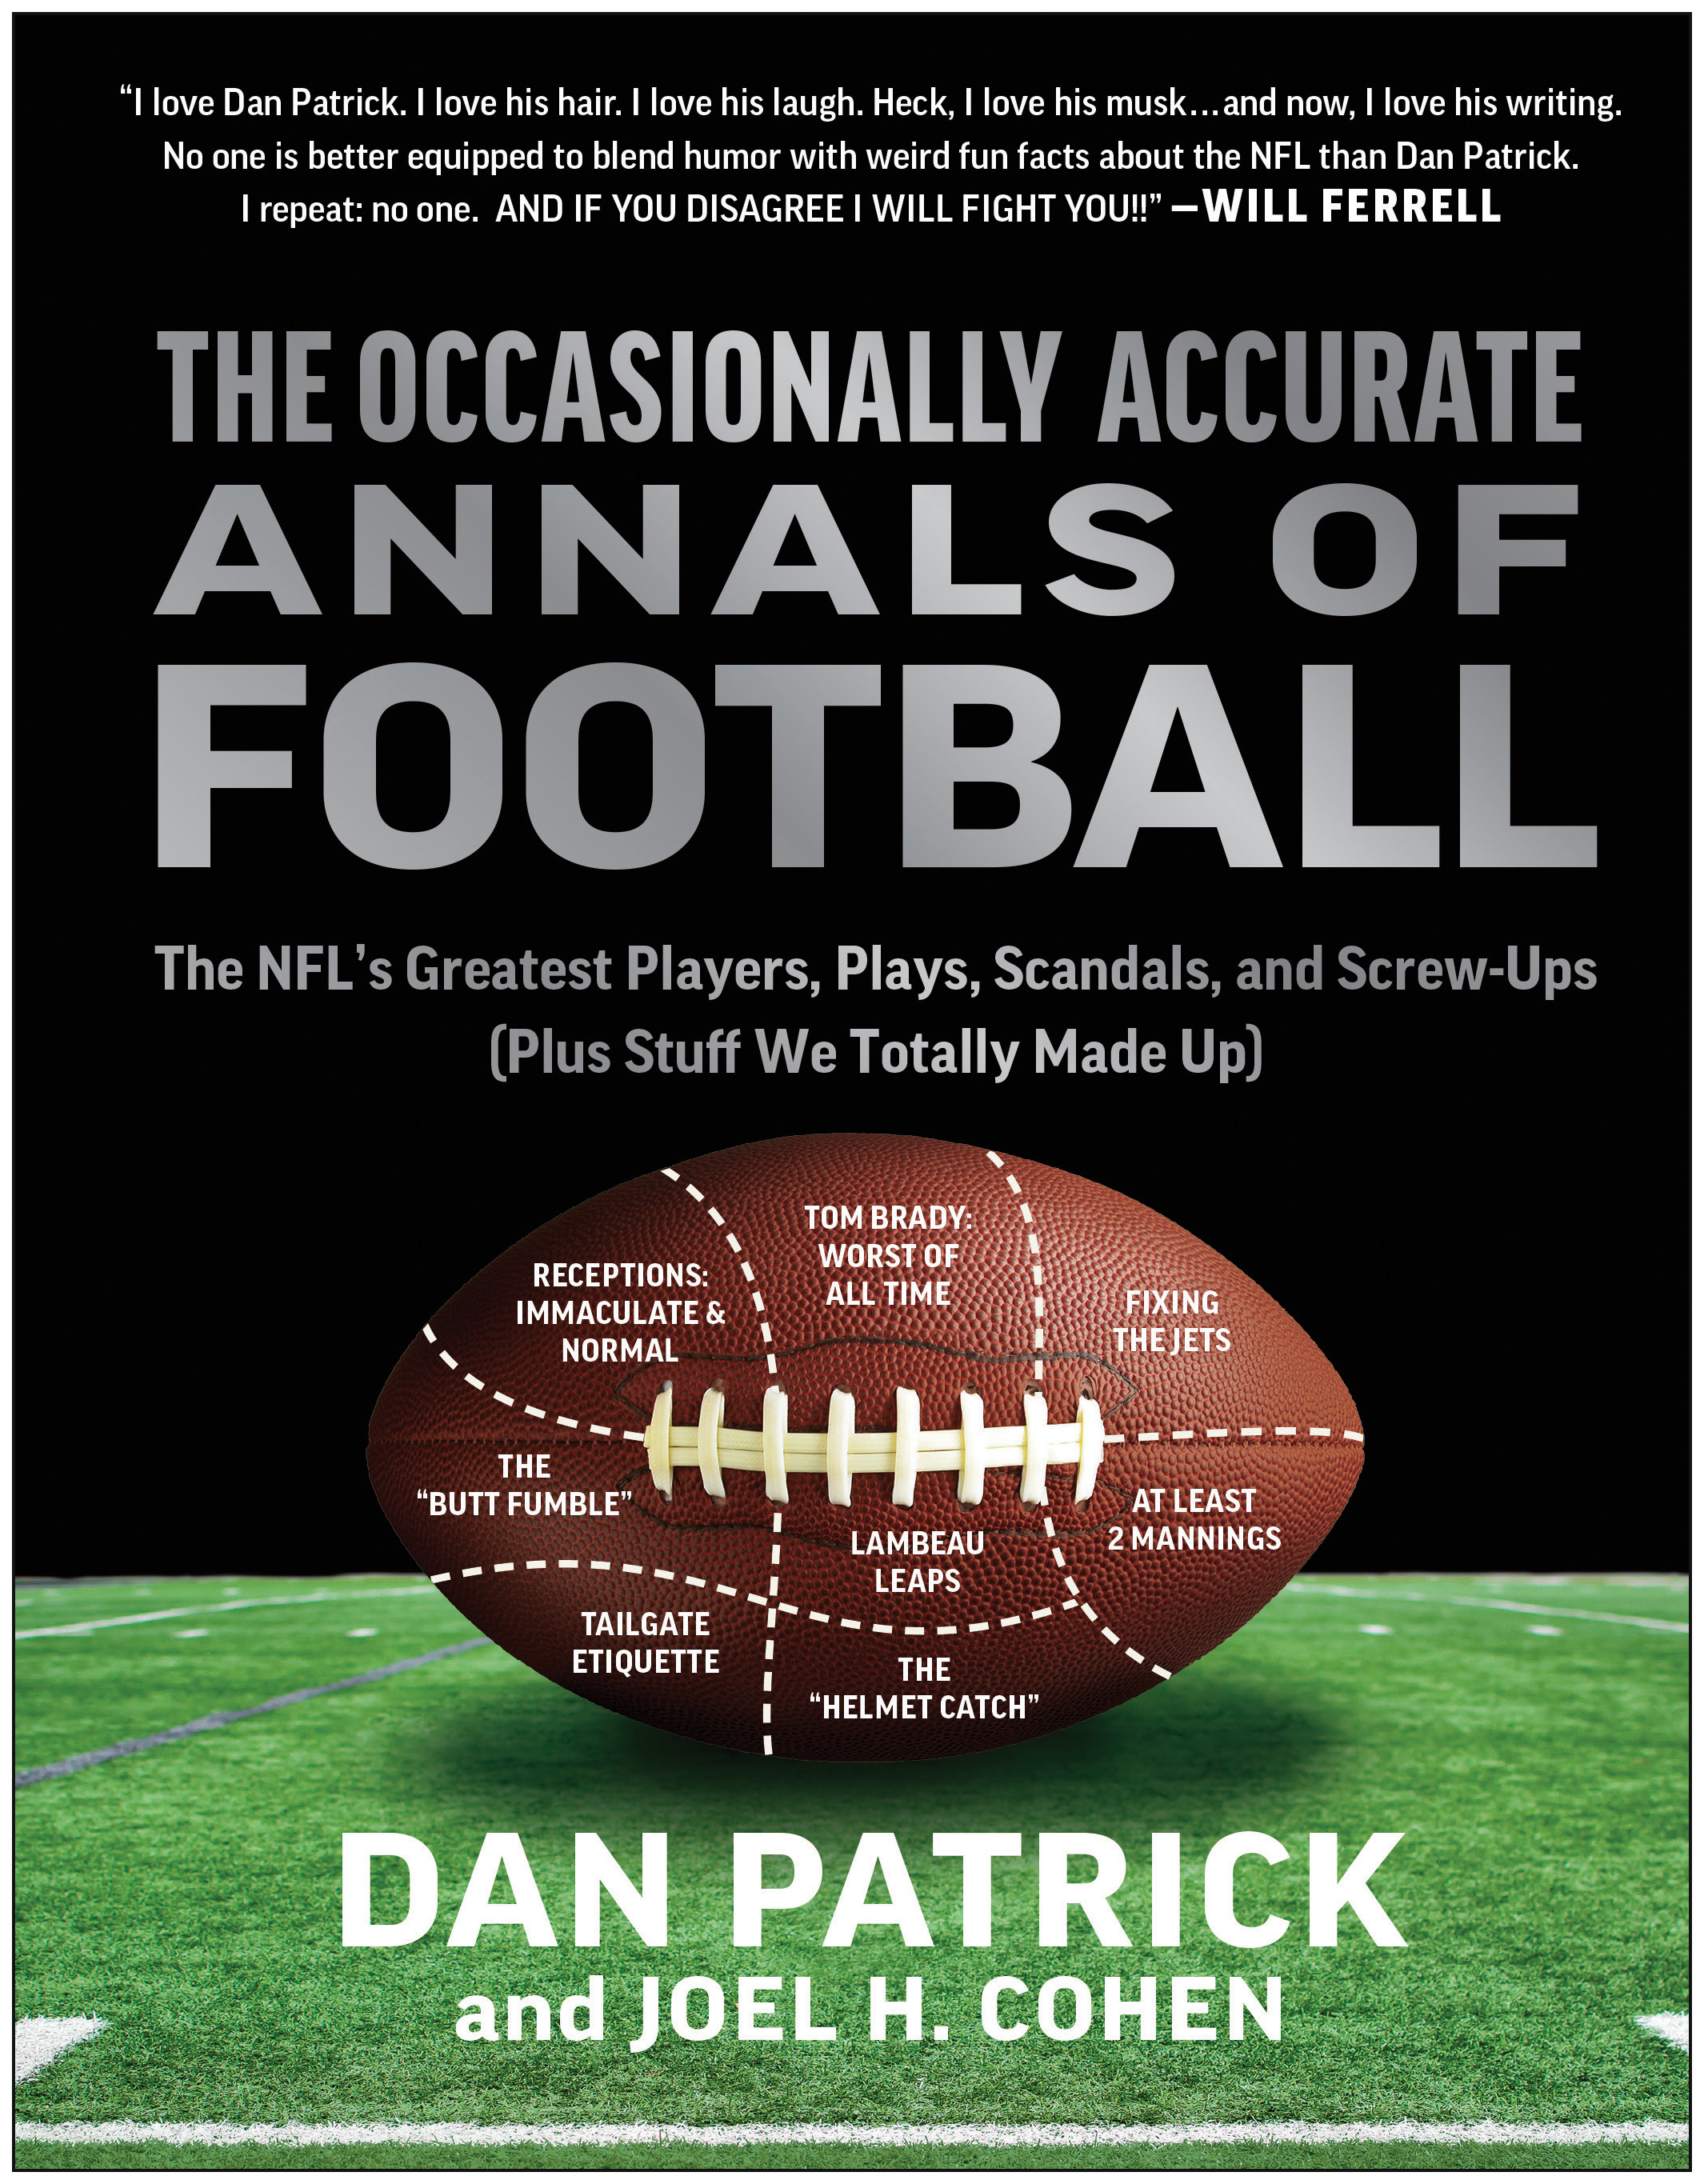 The Occasionally Accurate Annals of Football : The NFL's Greatest Players, Plays, Scandals, and Screw-Ups (Plus Stuff We Totally Made Up) | Patrick, Dan (Auteur) | Cohen, Joel H. (Auteur)